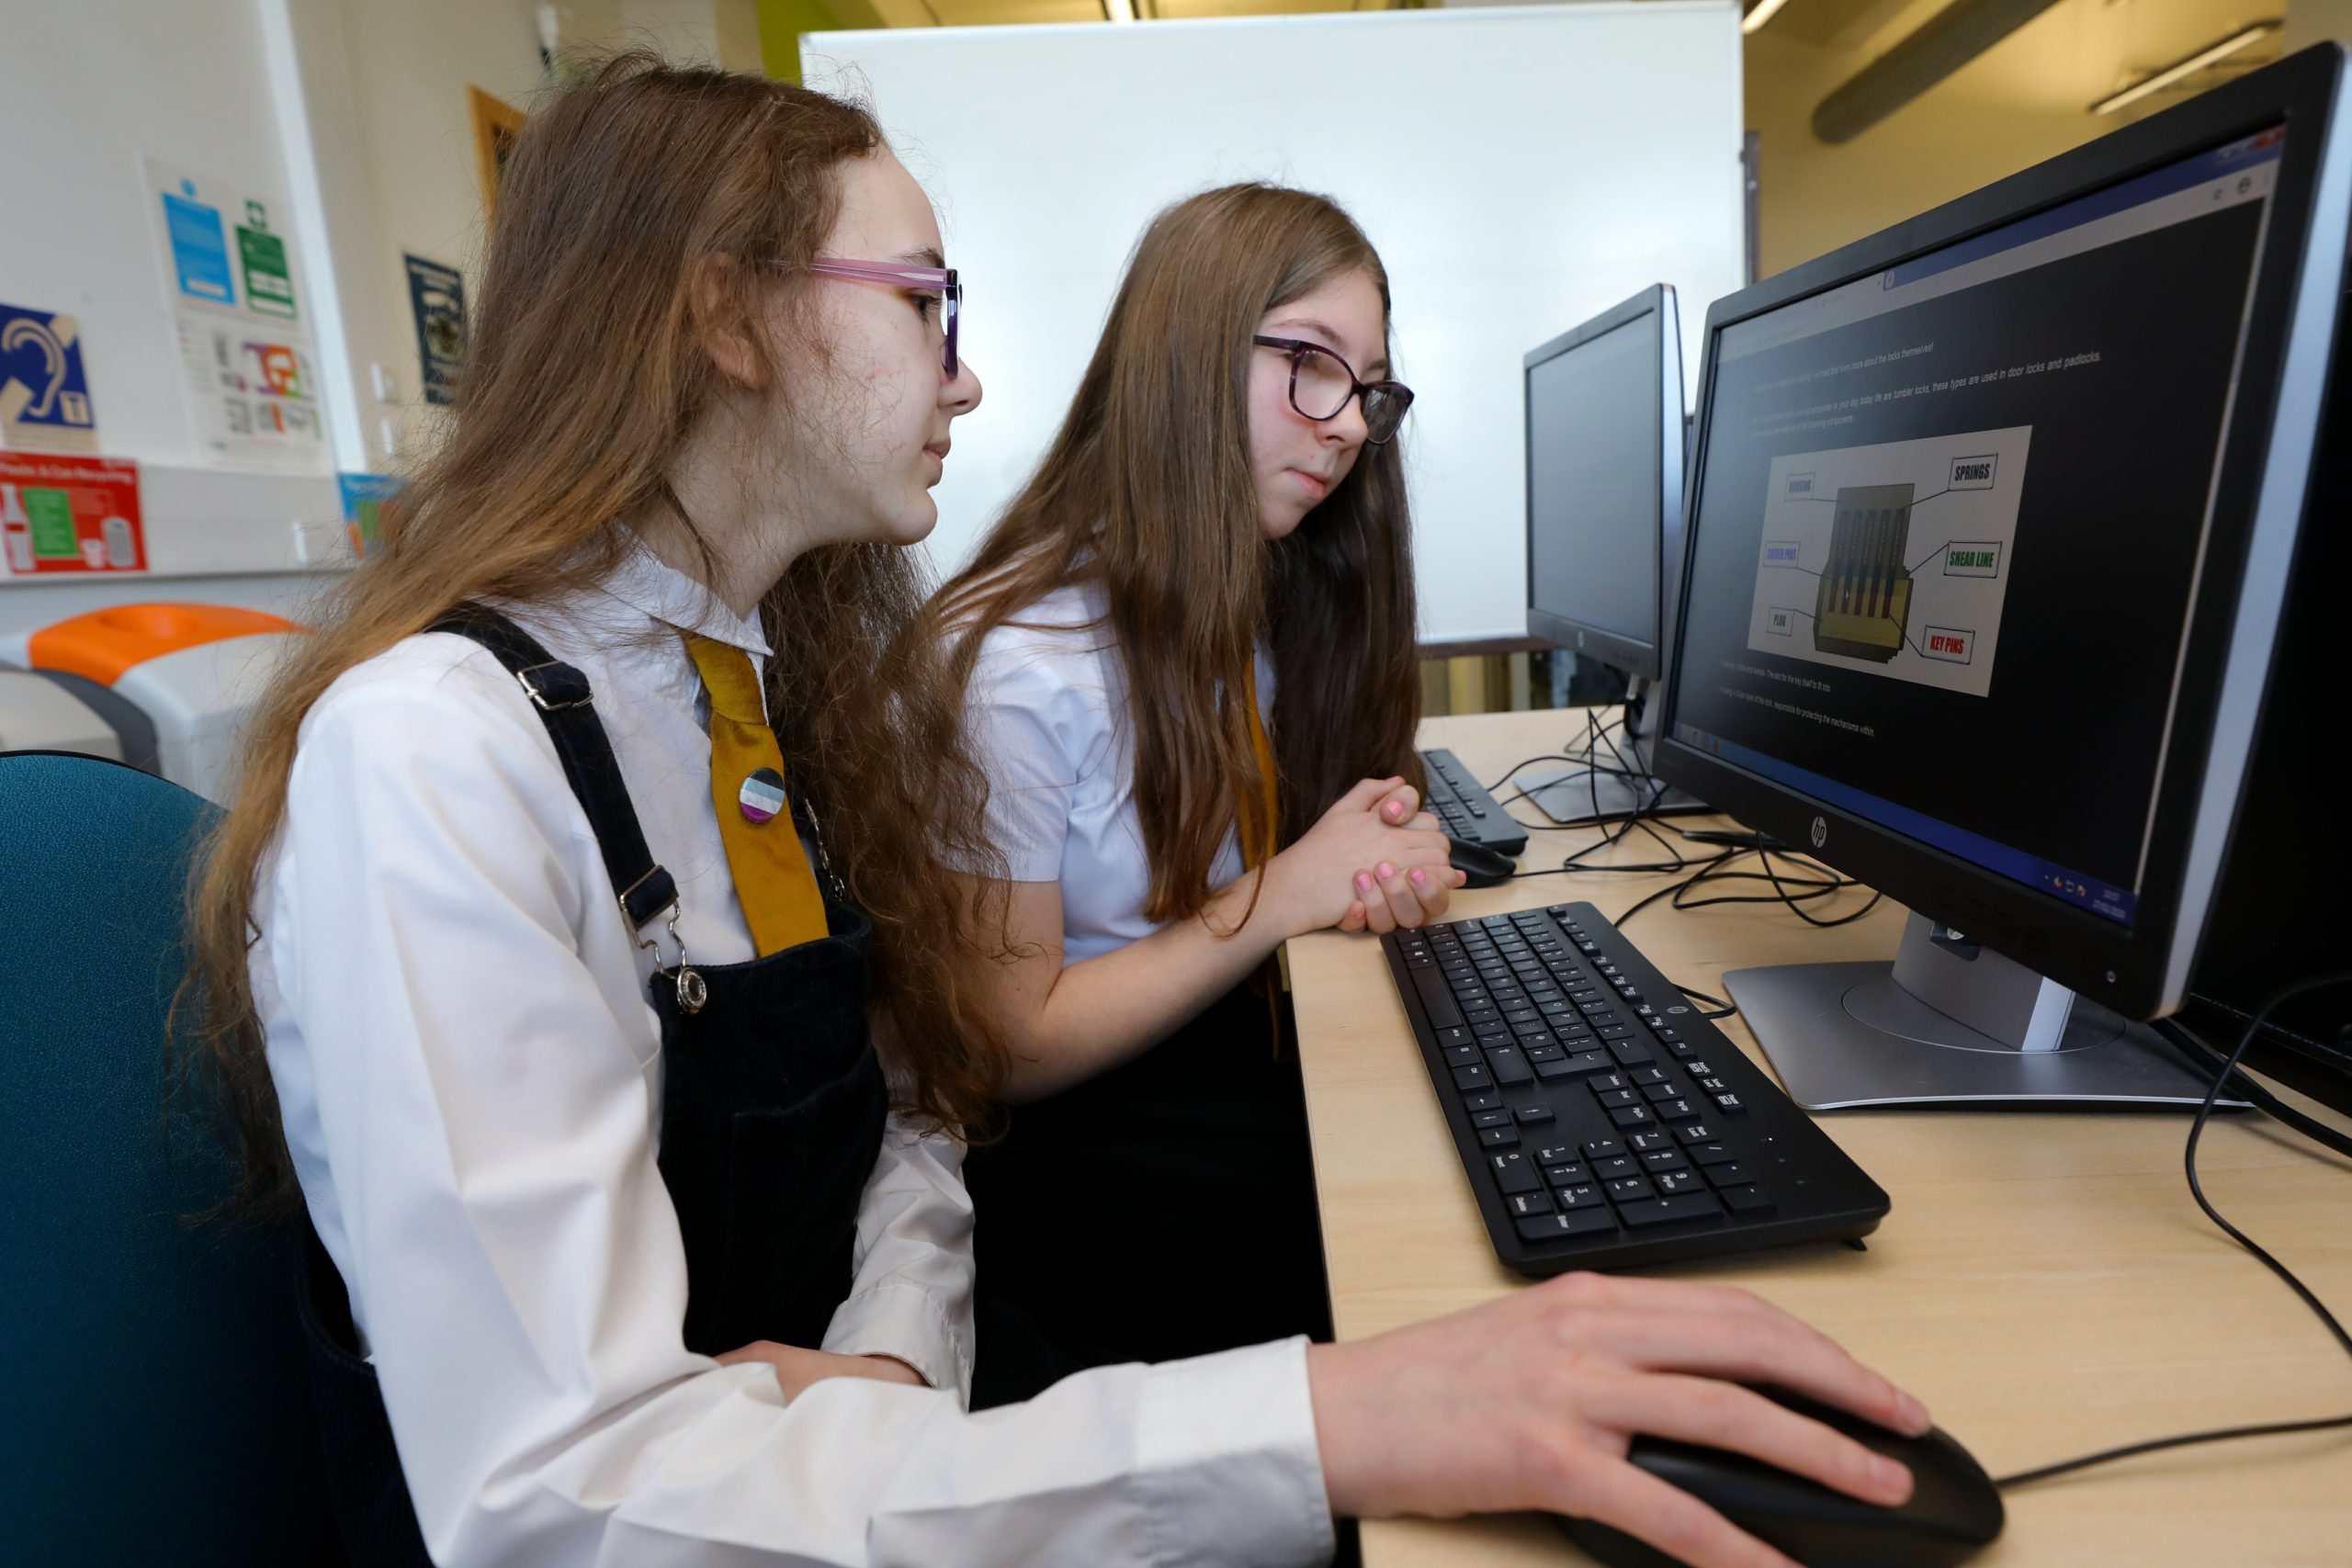 Criagie High School pupils Lea McLeod, left, and Keraleigh Simpson, at the Password Cracking workshop at Abertay University in Dundee